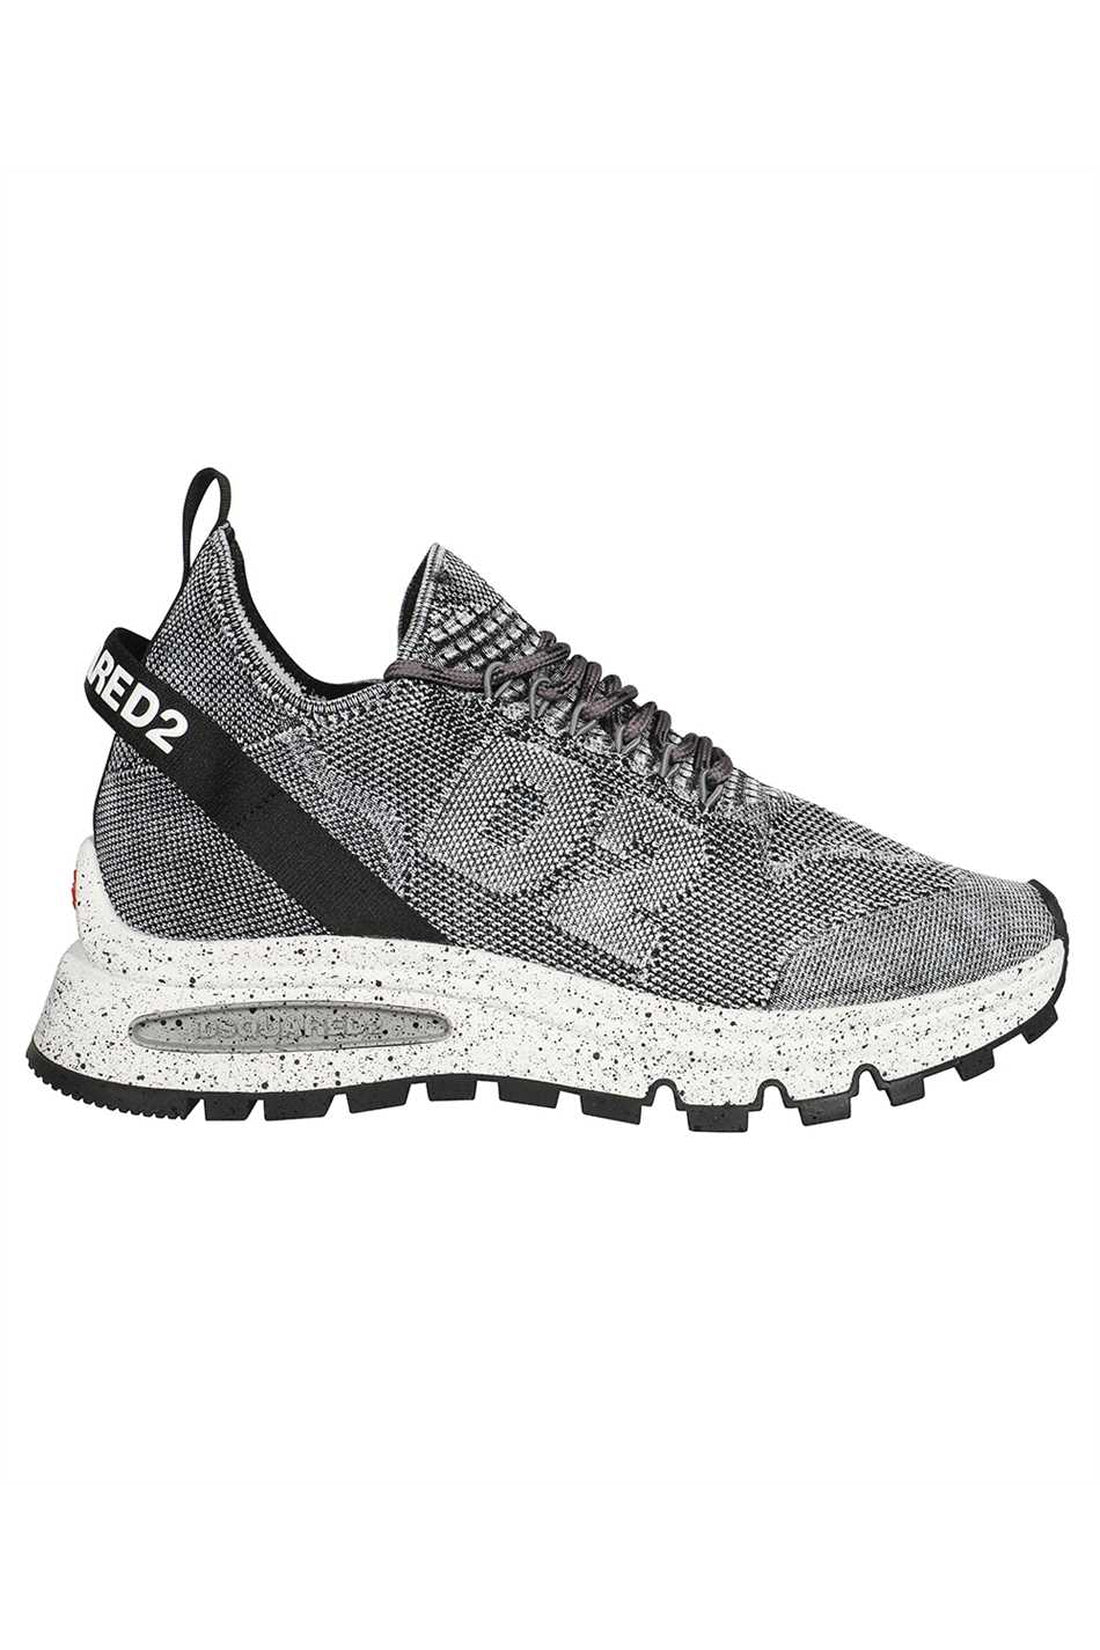 Dsquared2-OUTLET-SALE-Run DS2 low-top sneakers-ARCHIVIST